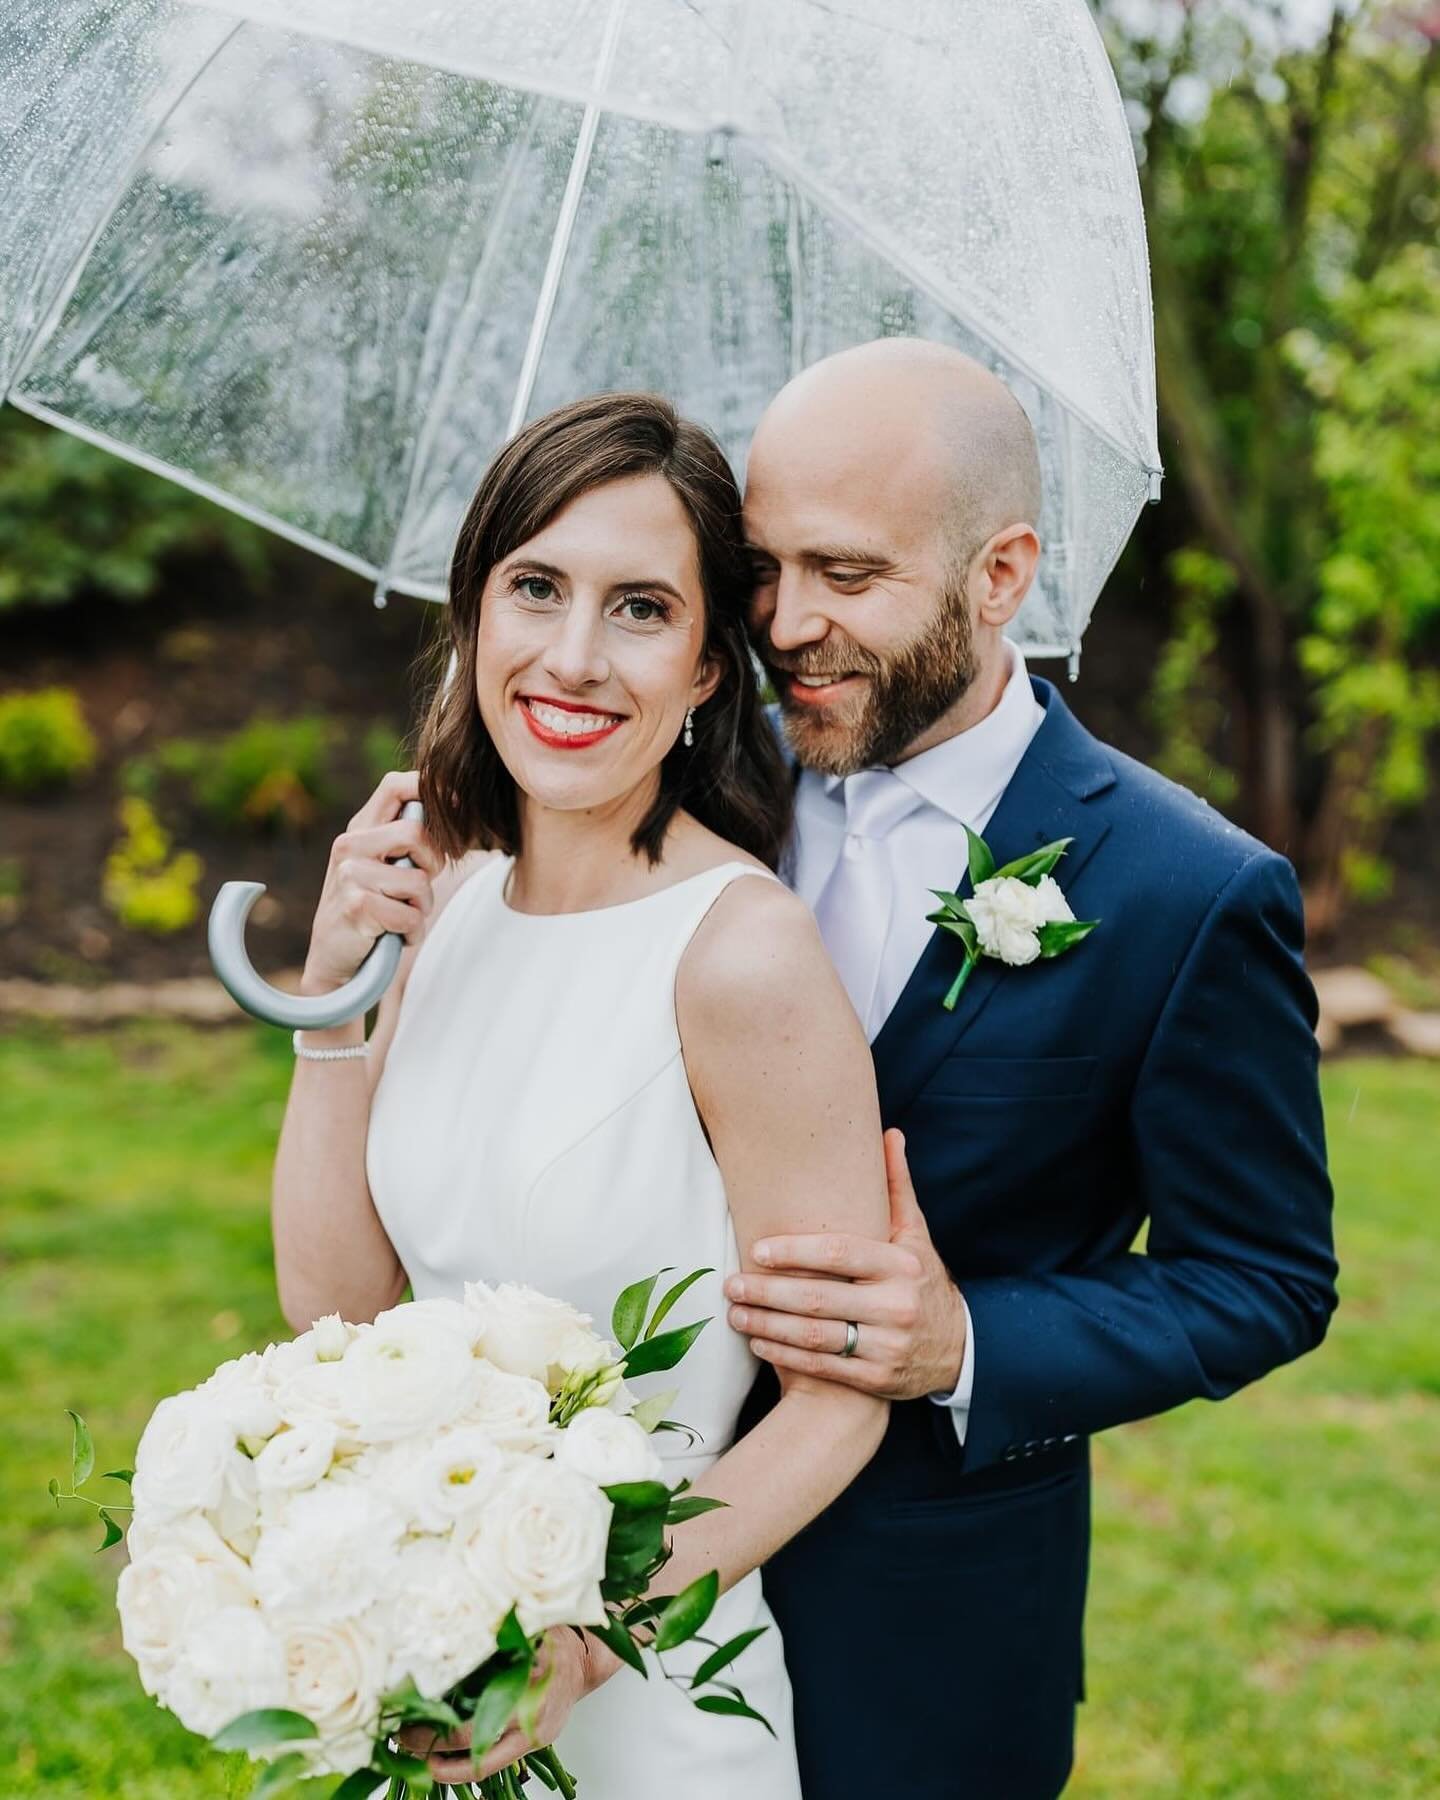 Ashley &amp; Eric had the most beautiful spring wedding at Lilac Hill this weekend. Not even some rain could put a damper on how gorgeous this entire day was. It was an absolute pleasure getting to spend the day with their friends and family. Congrat